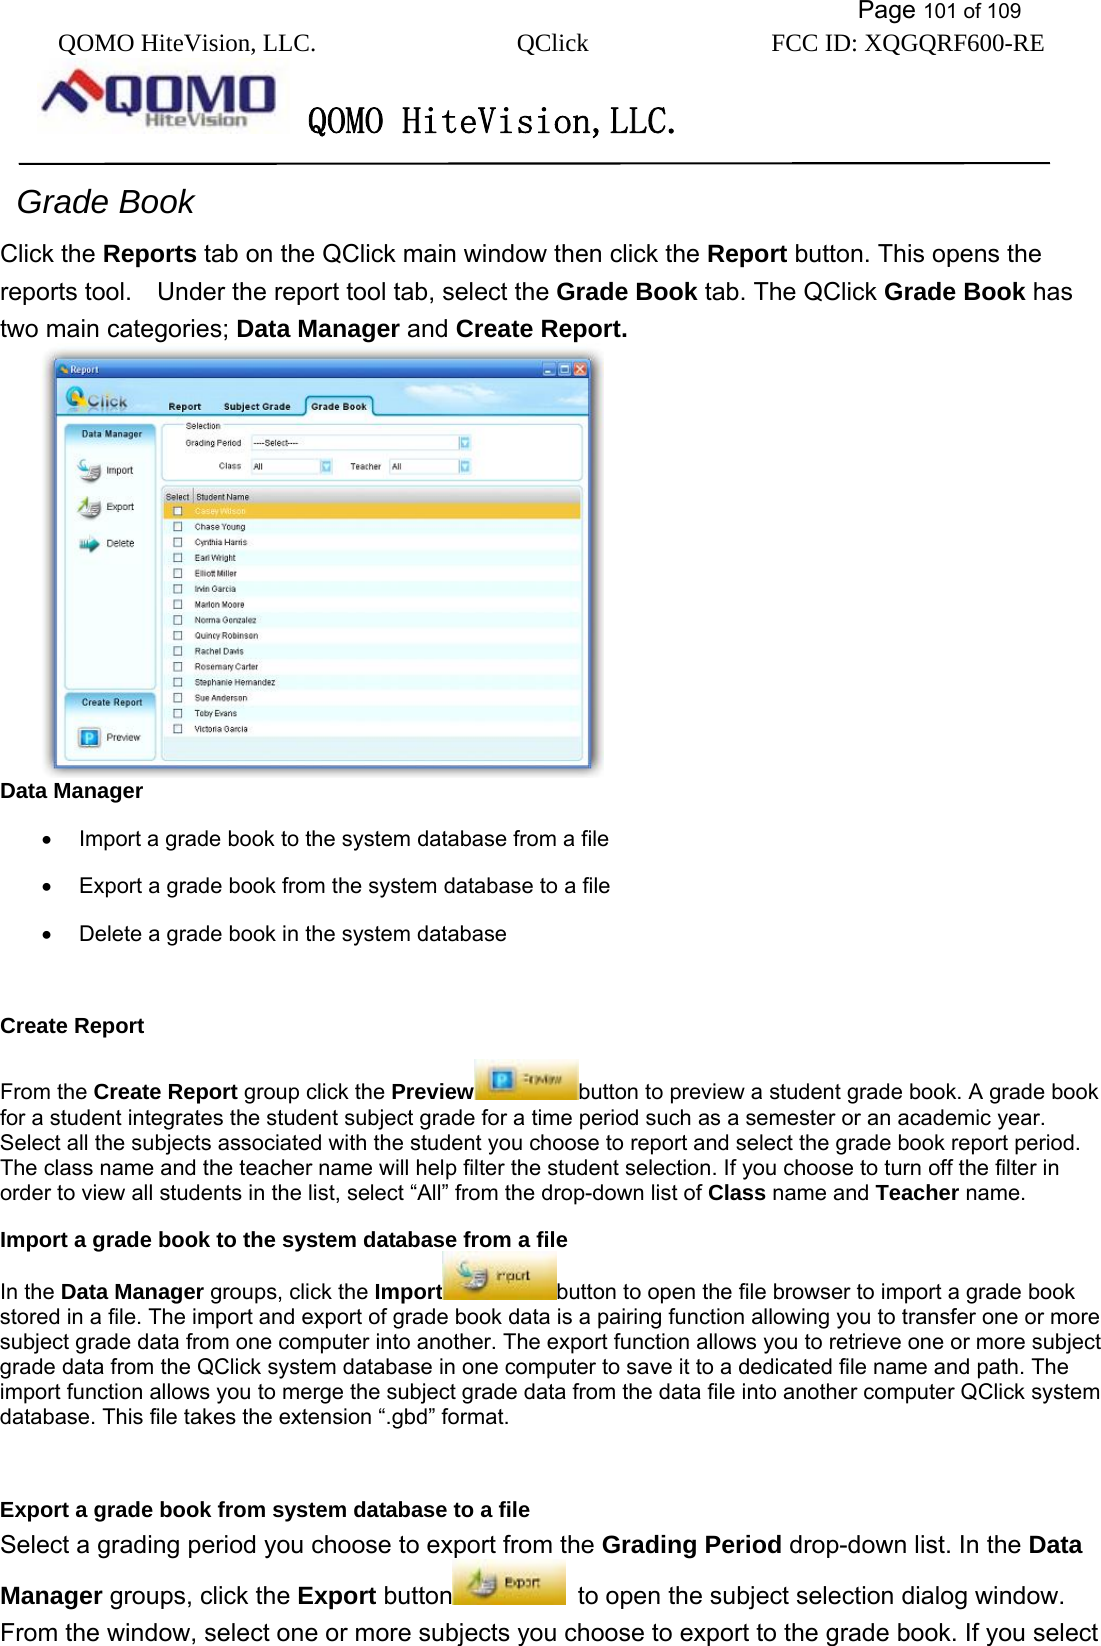           Page 101 of 109 QOMO HiteVision, LLC.  QClick        FCC ID: XQGQRF600-RE     QOMO HiteVision,LLC.    Grade Book Click the Reports tab on the QClick main window then click the Report button. This opens the reports tool.    Under the report tool tab, select the Grade Book tab. The QClick Grade Book has two main categories; Data Manager and Create Report.  Data Manager •  Import a grade book to the system database from a file   •  Export a grade book from the system database to a file •  Delete a grade book in the system database  Create Report From the Create Report group click the Preview button to preview a student grade book. A grade book for a student integrates the student subject grade for a time period such as a semester or an academic year. Select all the subjects associated with the student you choose to report and select the grade book report period. The class name and the teacher name will help filter the student selection. If you choose to turn off the filter in order to view all students in the list, select “All” from the drop-down list of Class name and Teacher name. Import a grade book to the system database from a file In the Data Manager groups, click the Import button to open the file browser to import a grade book stored in a file. The import and export of grade book data is a pairing function allowing you to transfer one or more subject grade data from one computer into another. The export function allows you to retrieve one or more subject grade data from the QClick system database in one computer to save it to a dedicated file name and path. The import function allows you to merge the subject grade data from the data file into another computer QClick system database. This file takes the extension “.gbd” format.    Export a grade book from system database to a file Select a grading period you choose to export from the Grading Period drop-down list. In the Data Manager groups, click the Export button   to open the subject selection dialog window. From the window, select one or more subjects you choose to export to the grade book. If you select 